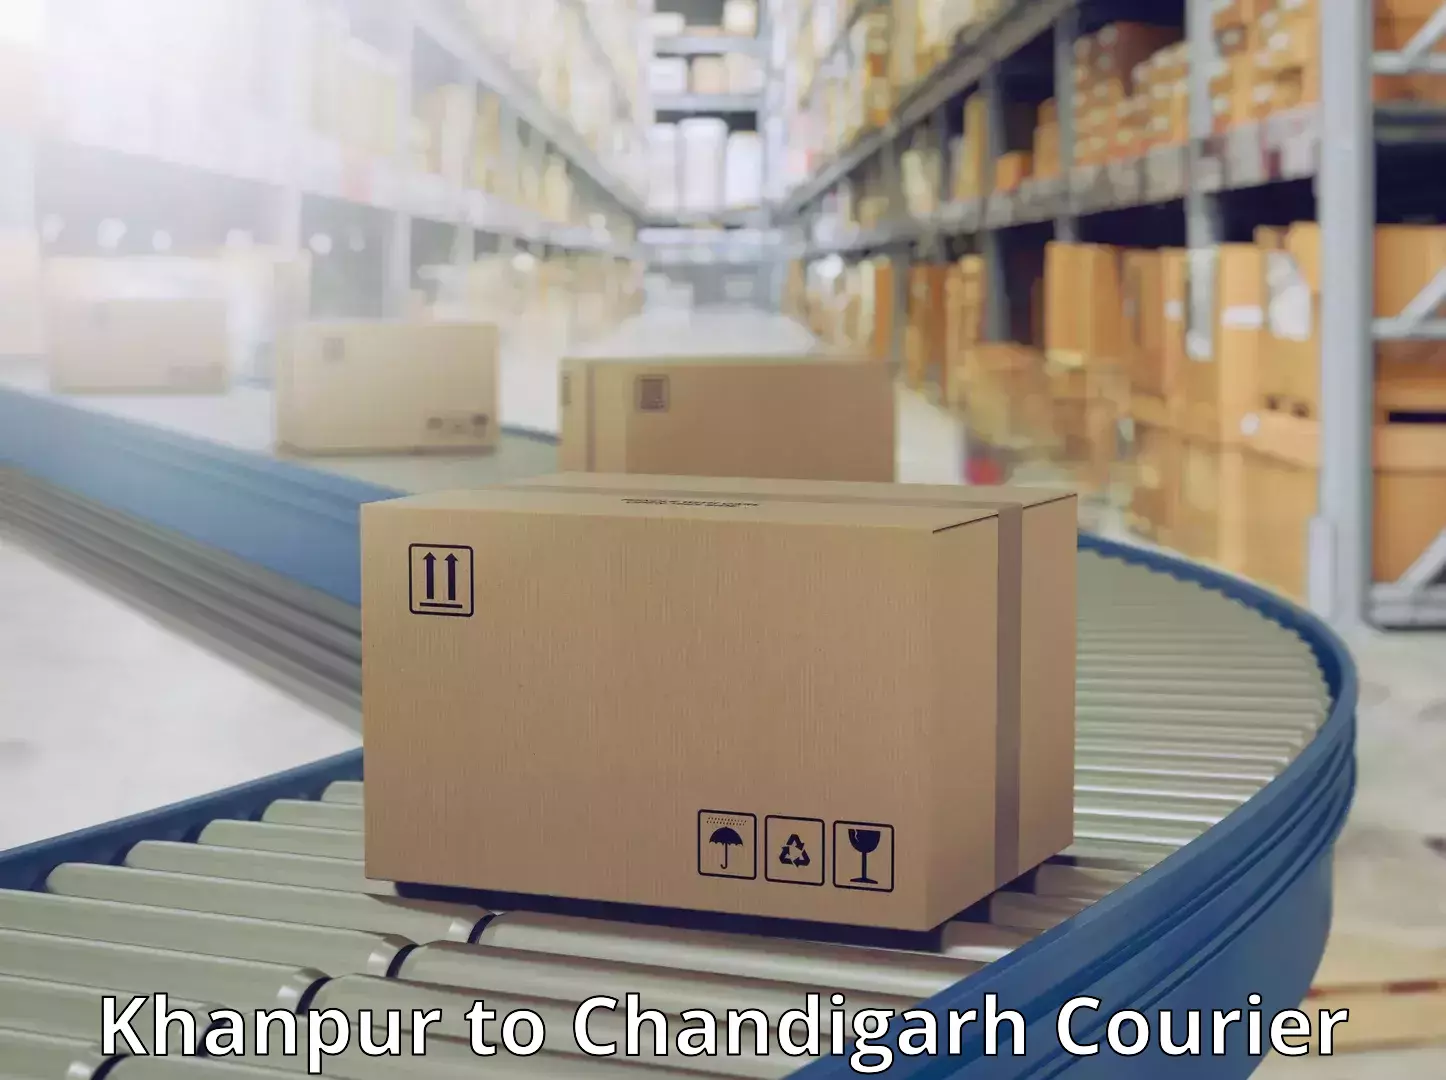 High-capacity shipping options Khanpur to Chandigarh